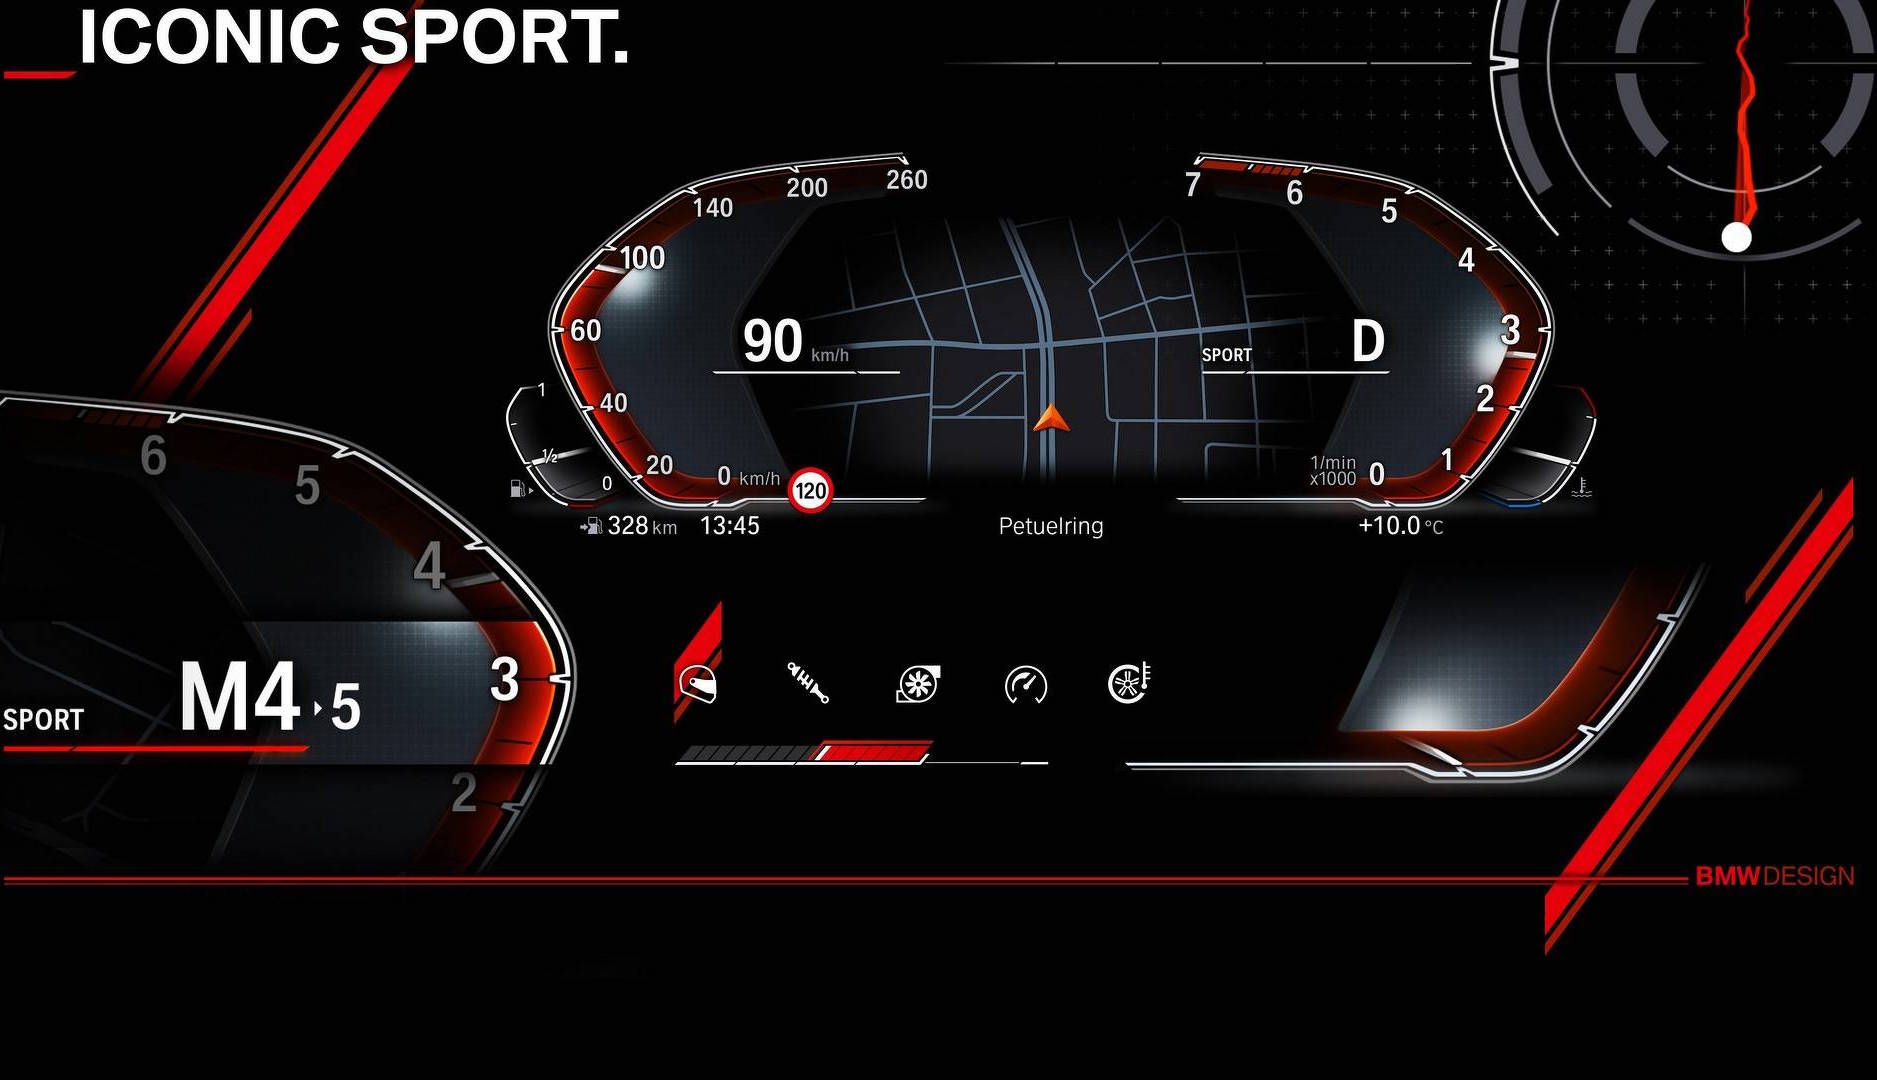 BMW previews new digital instrument cluster with Operating System 7.0